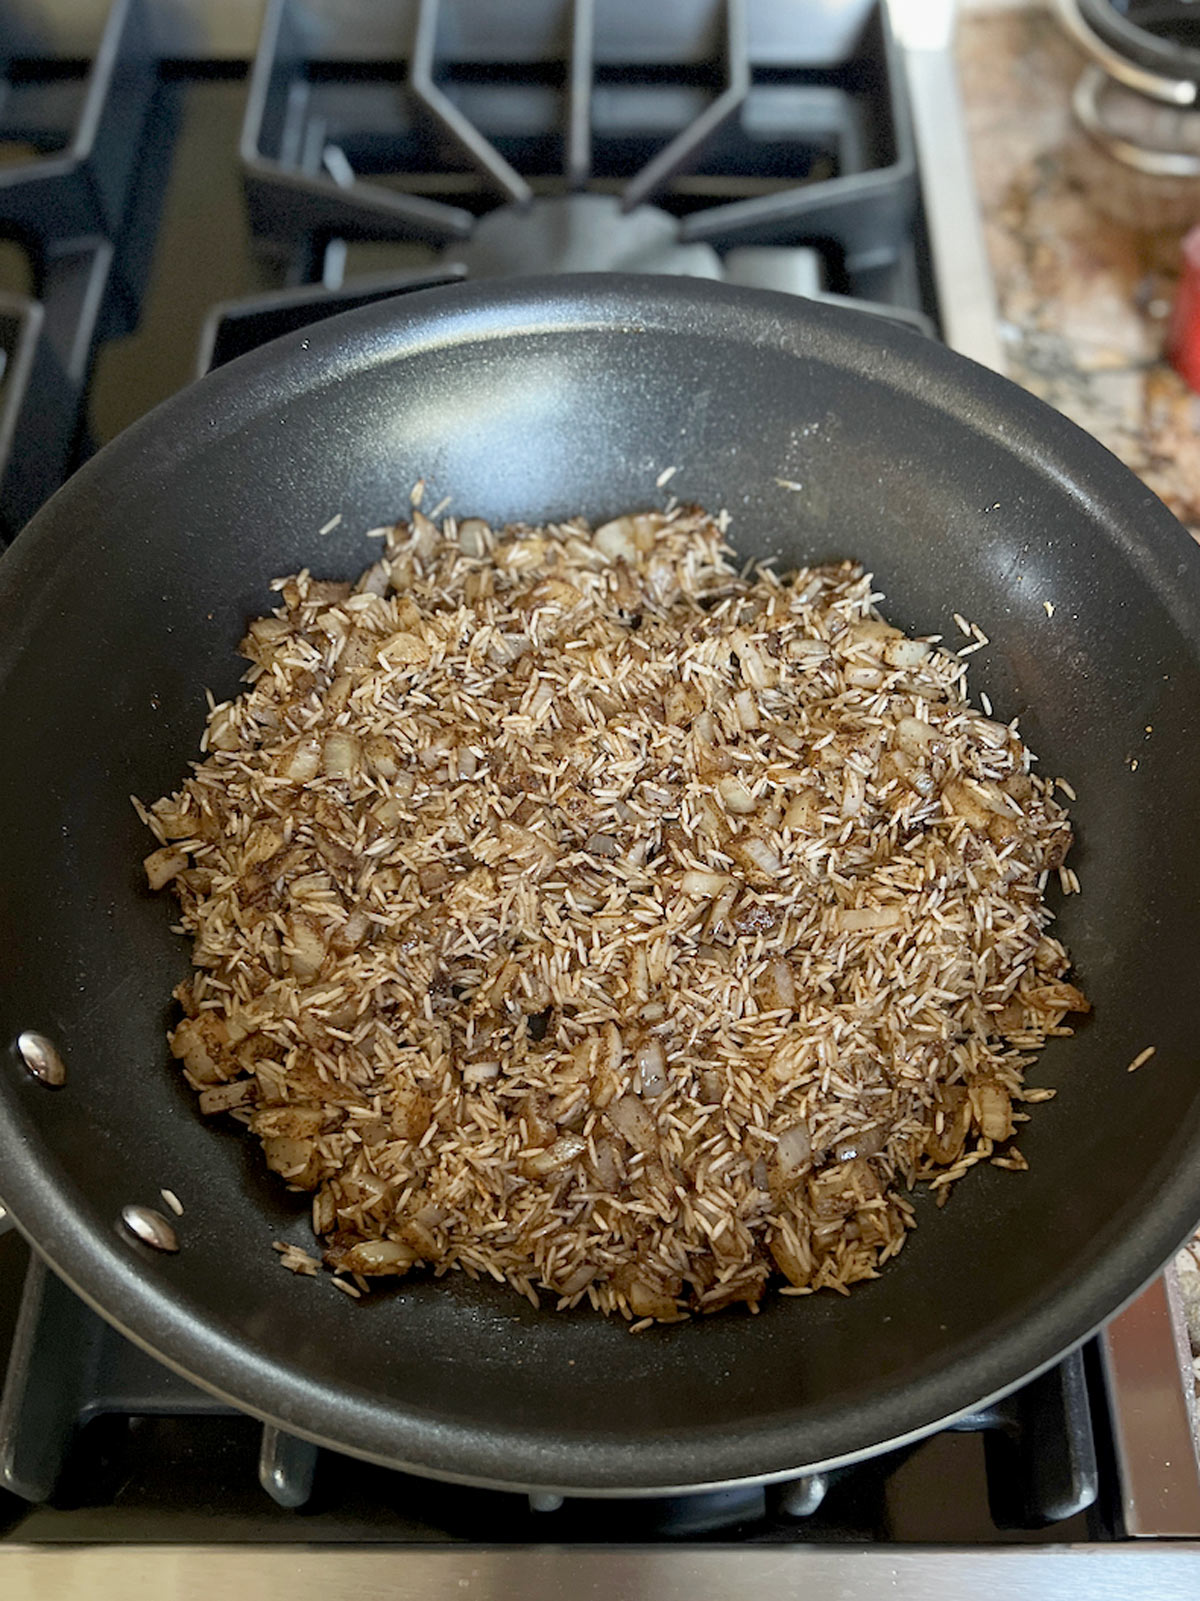 Onions, rice, and spices all mixed together in the fry pan.